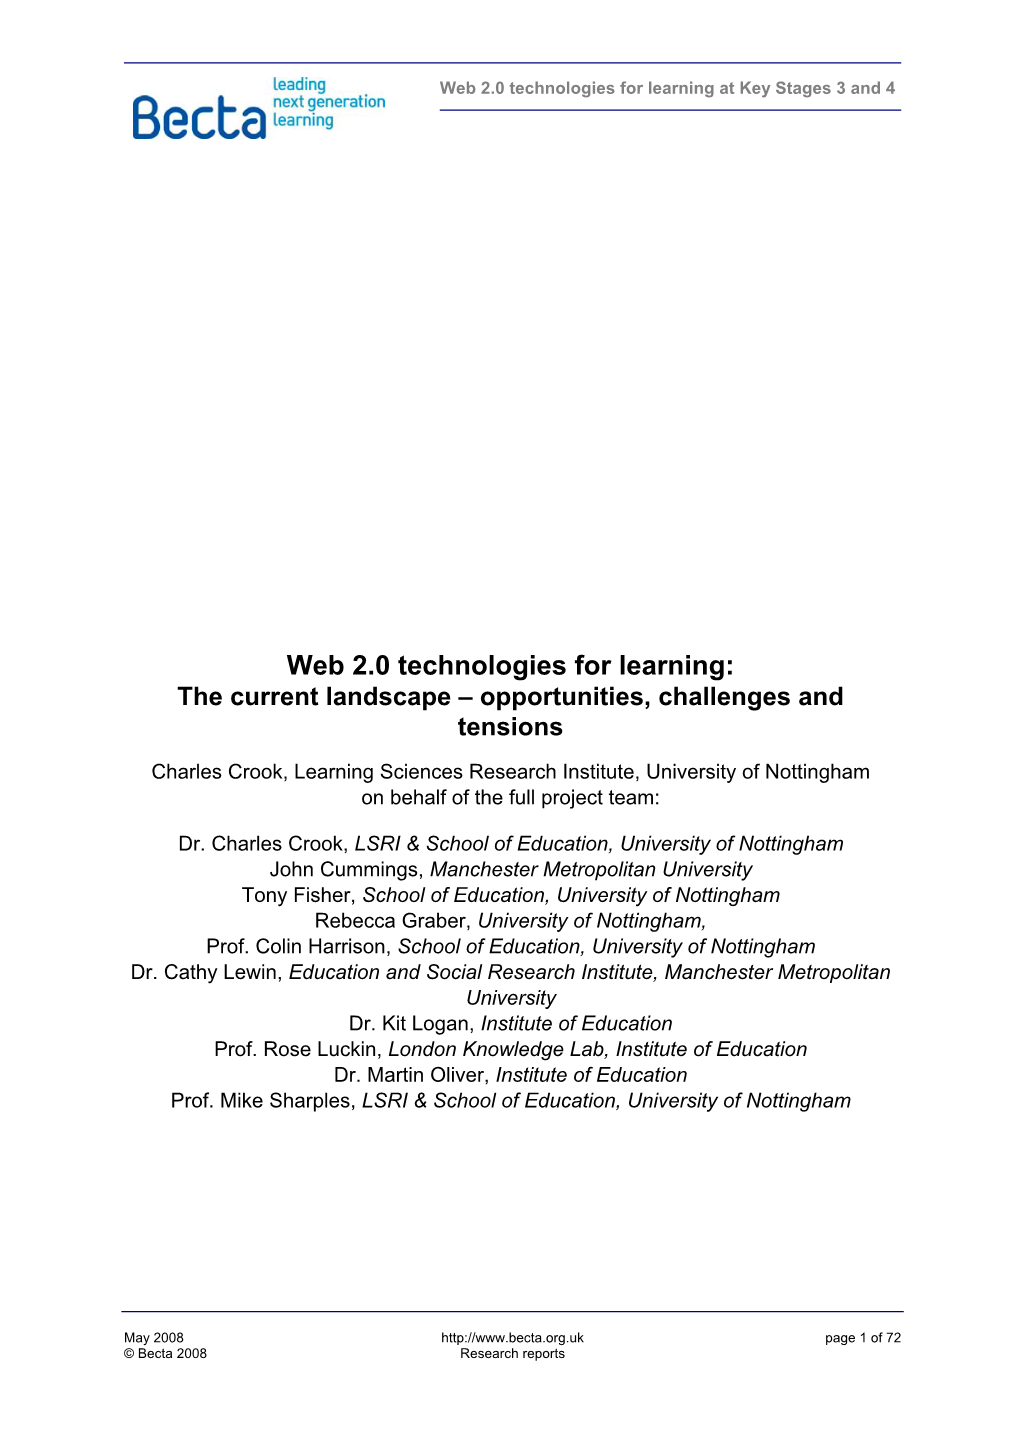 Web 2.0 Technologies for Learning: the Current Landscape – Opportunities, Challenges and Tensions